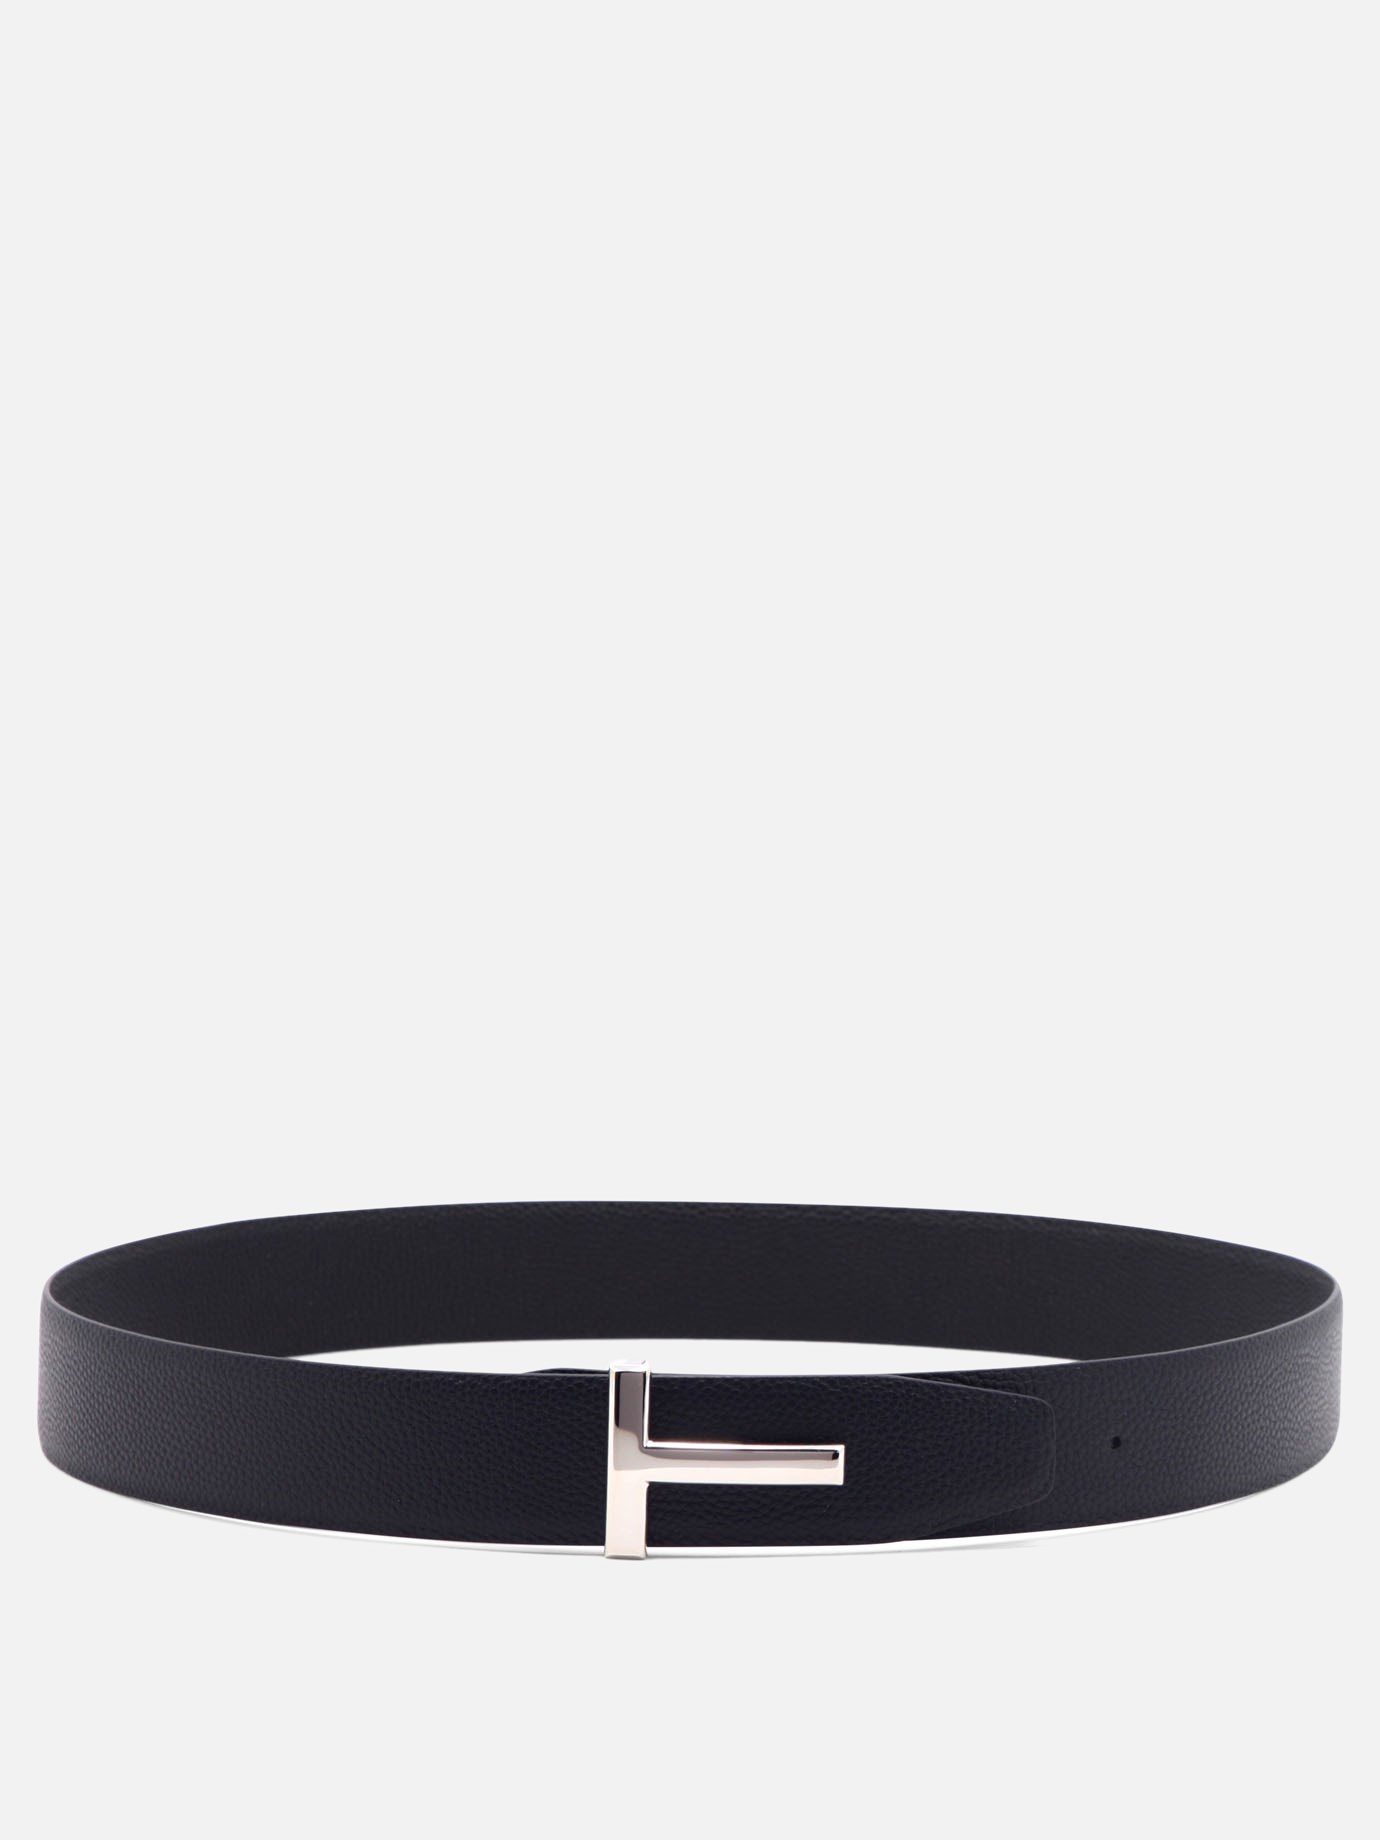  T-Icon  reversible beltby Tom Ford - 4